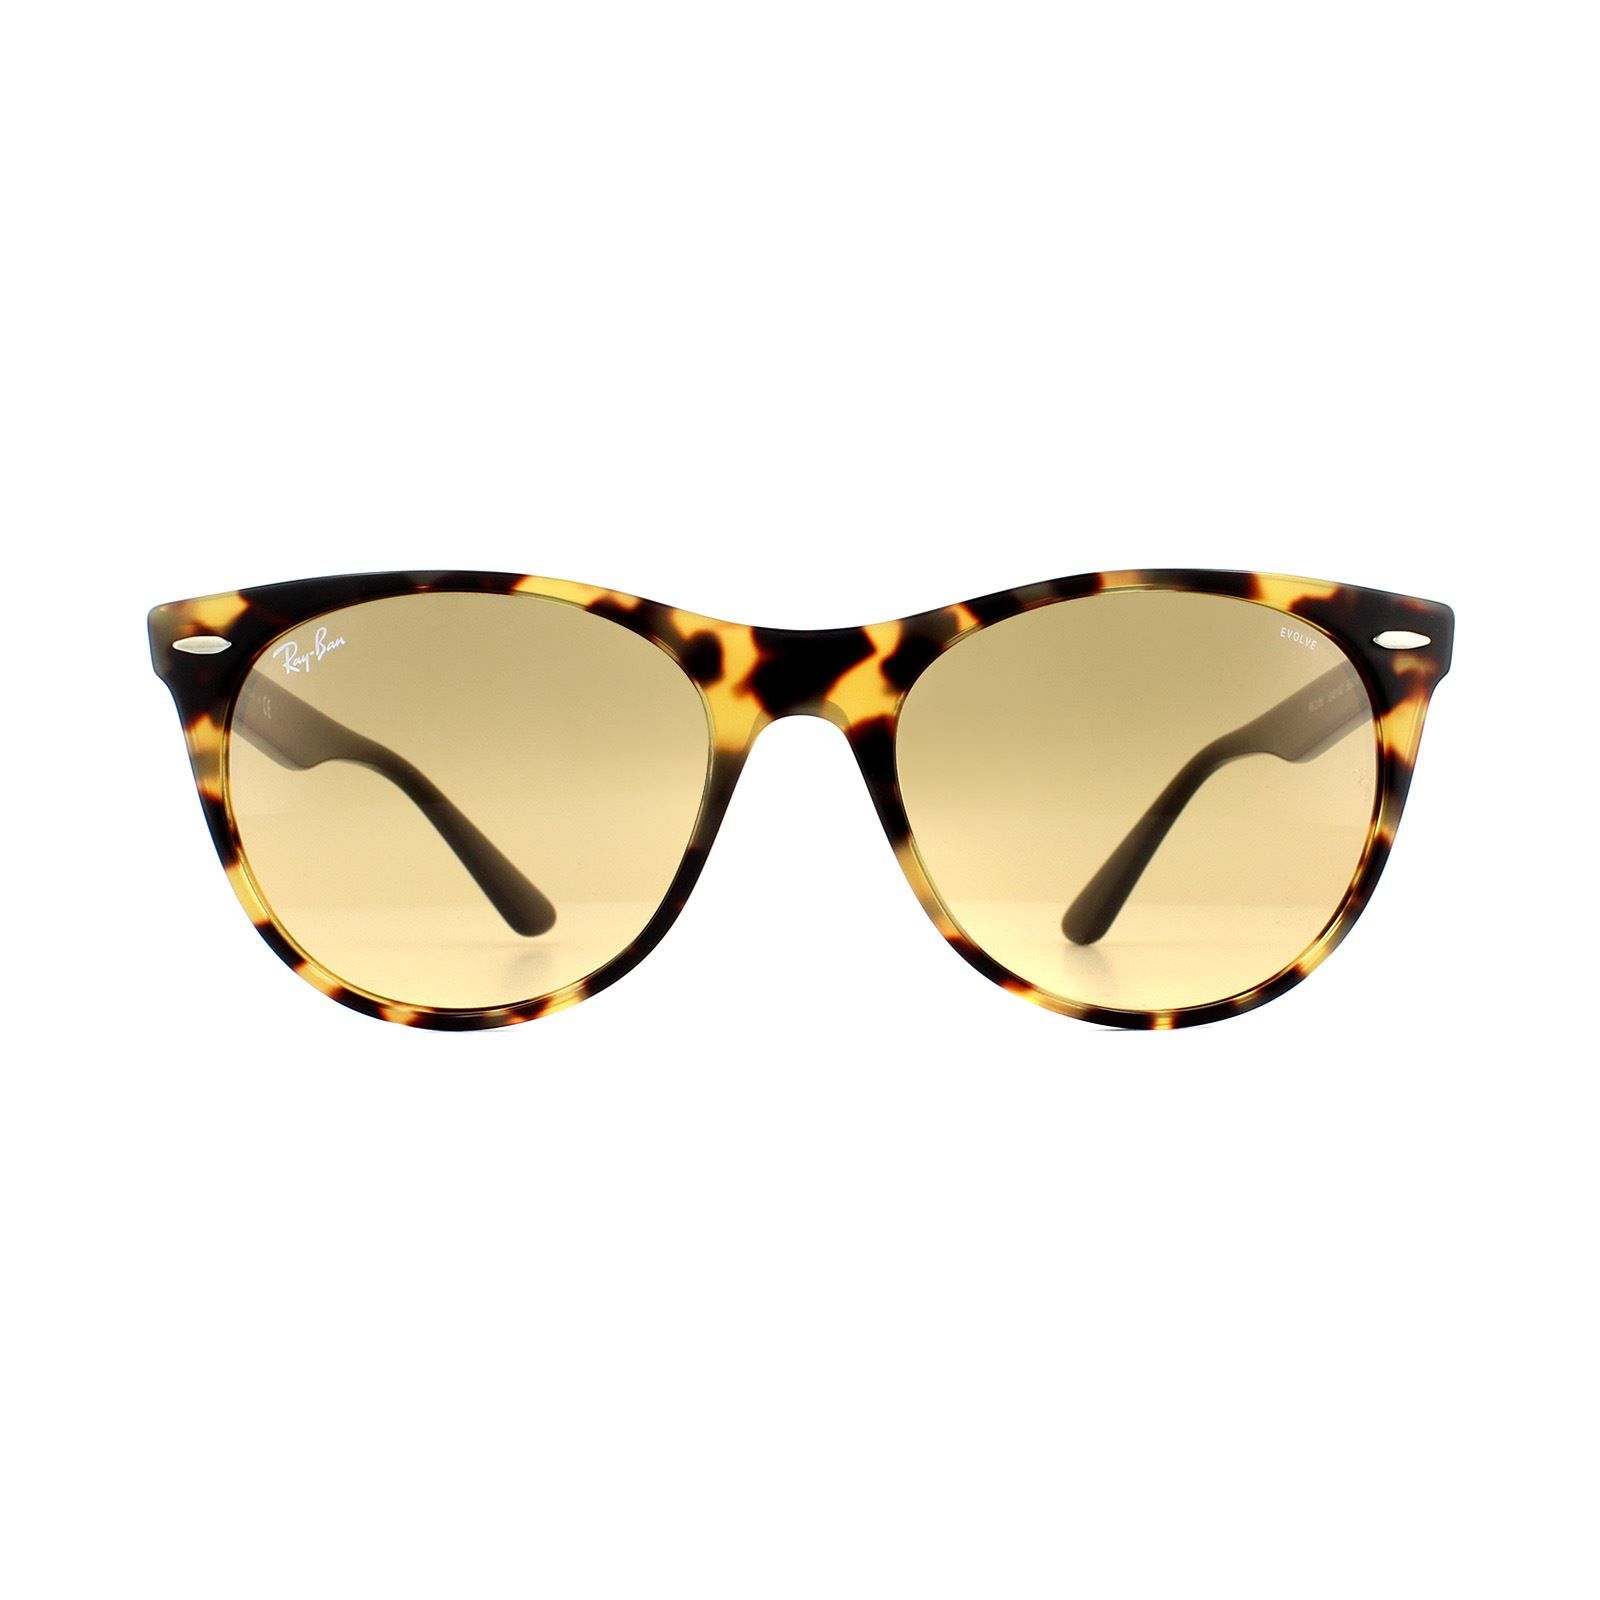 Ray-Ban Wayfarer II RB2185 1248AC Yellow Havana and Black Orange Photochromic are the newest addition to the Wayfarer collection. The Wayfarer II Evolve has taken on a rounded shape for the modern age. With typical Wayfarer characteristics, there's no denying which family these belong to. CornerÂ flicks, winged temples and hinge pins have all been taken from the original Wayfarer. The slim acetate frame and skinny temples deliver a cool and sophisticated feel.